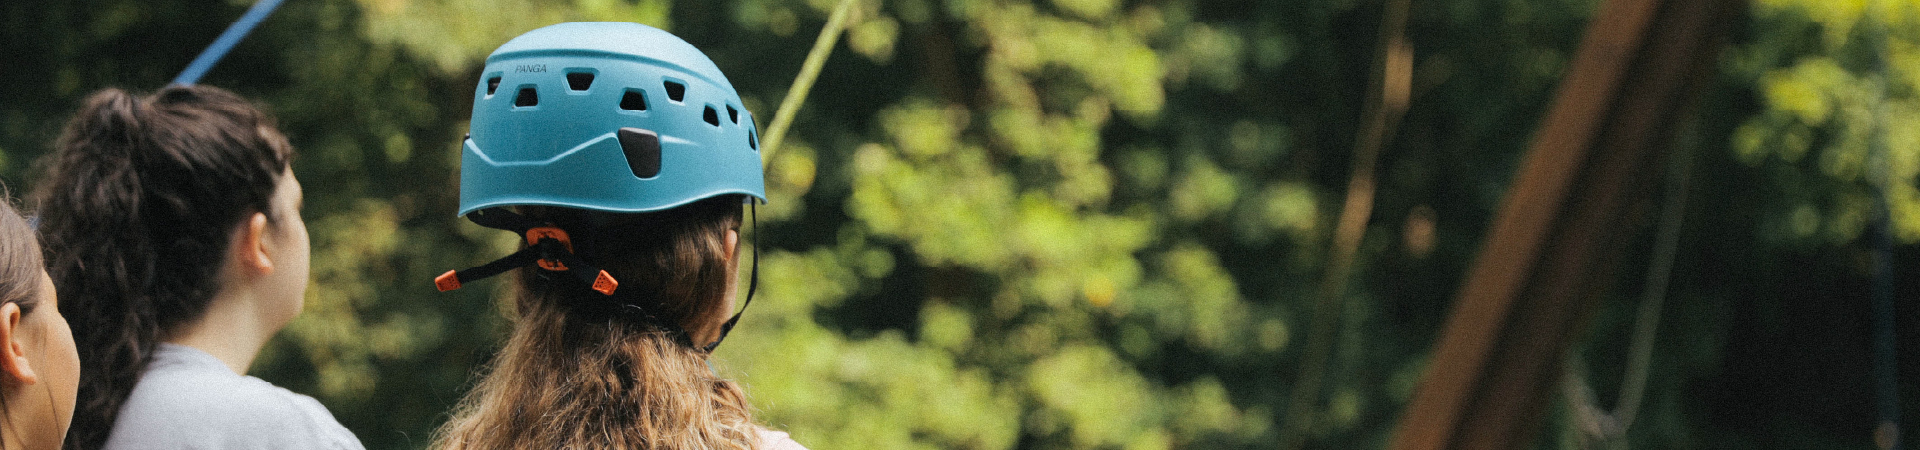  Girl Scout wearing helmet at alpine tower 